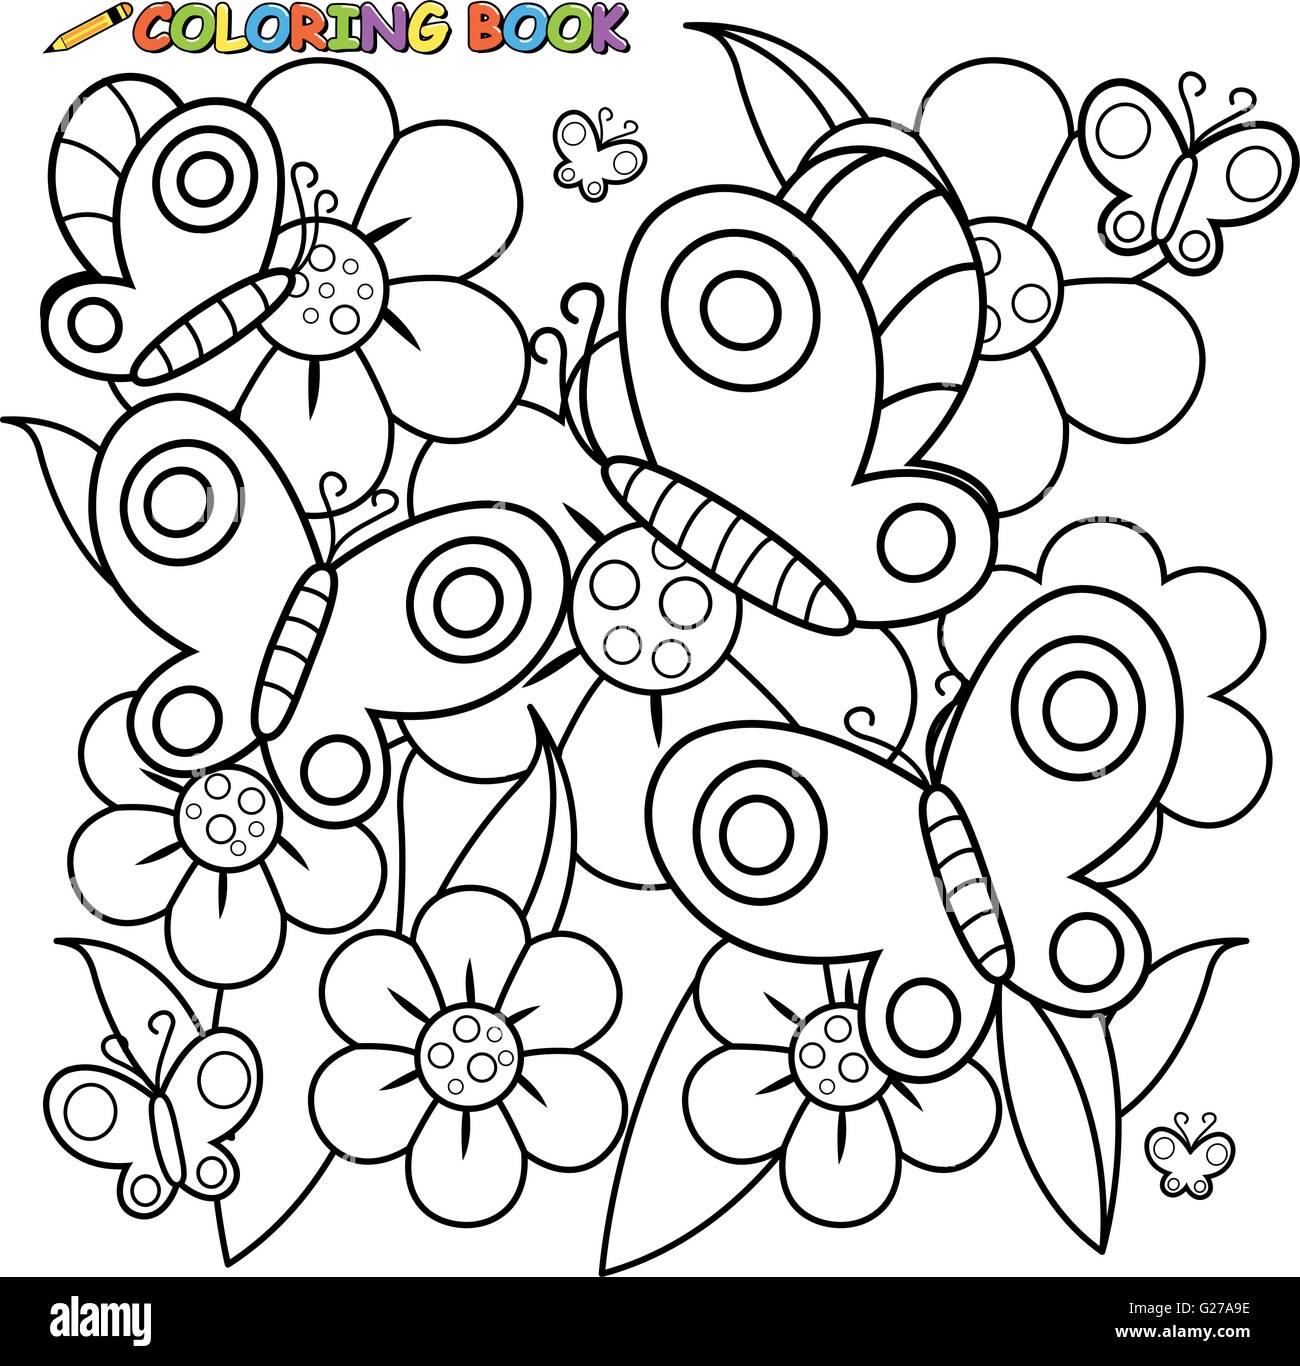 Coloring book page butterflies and flowers. Stock Vector